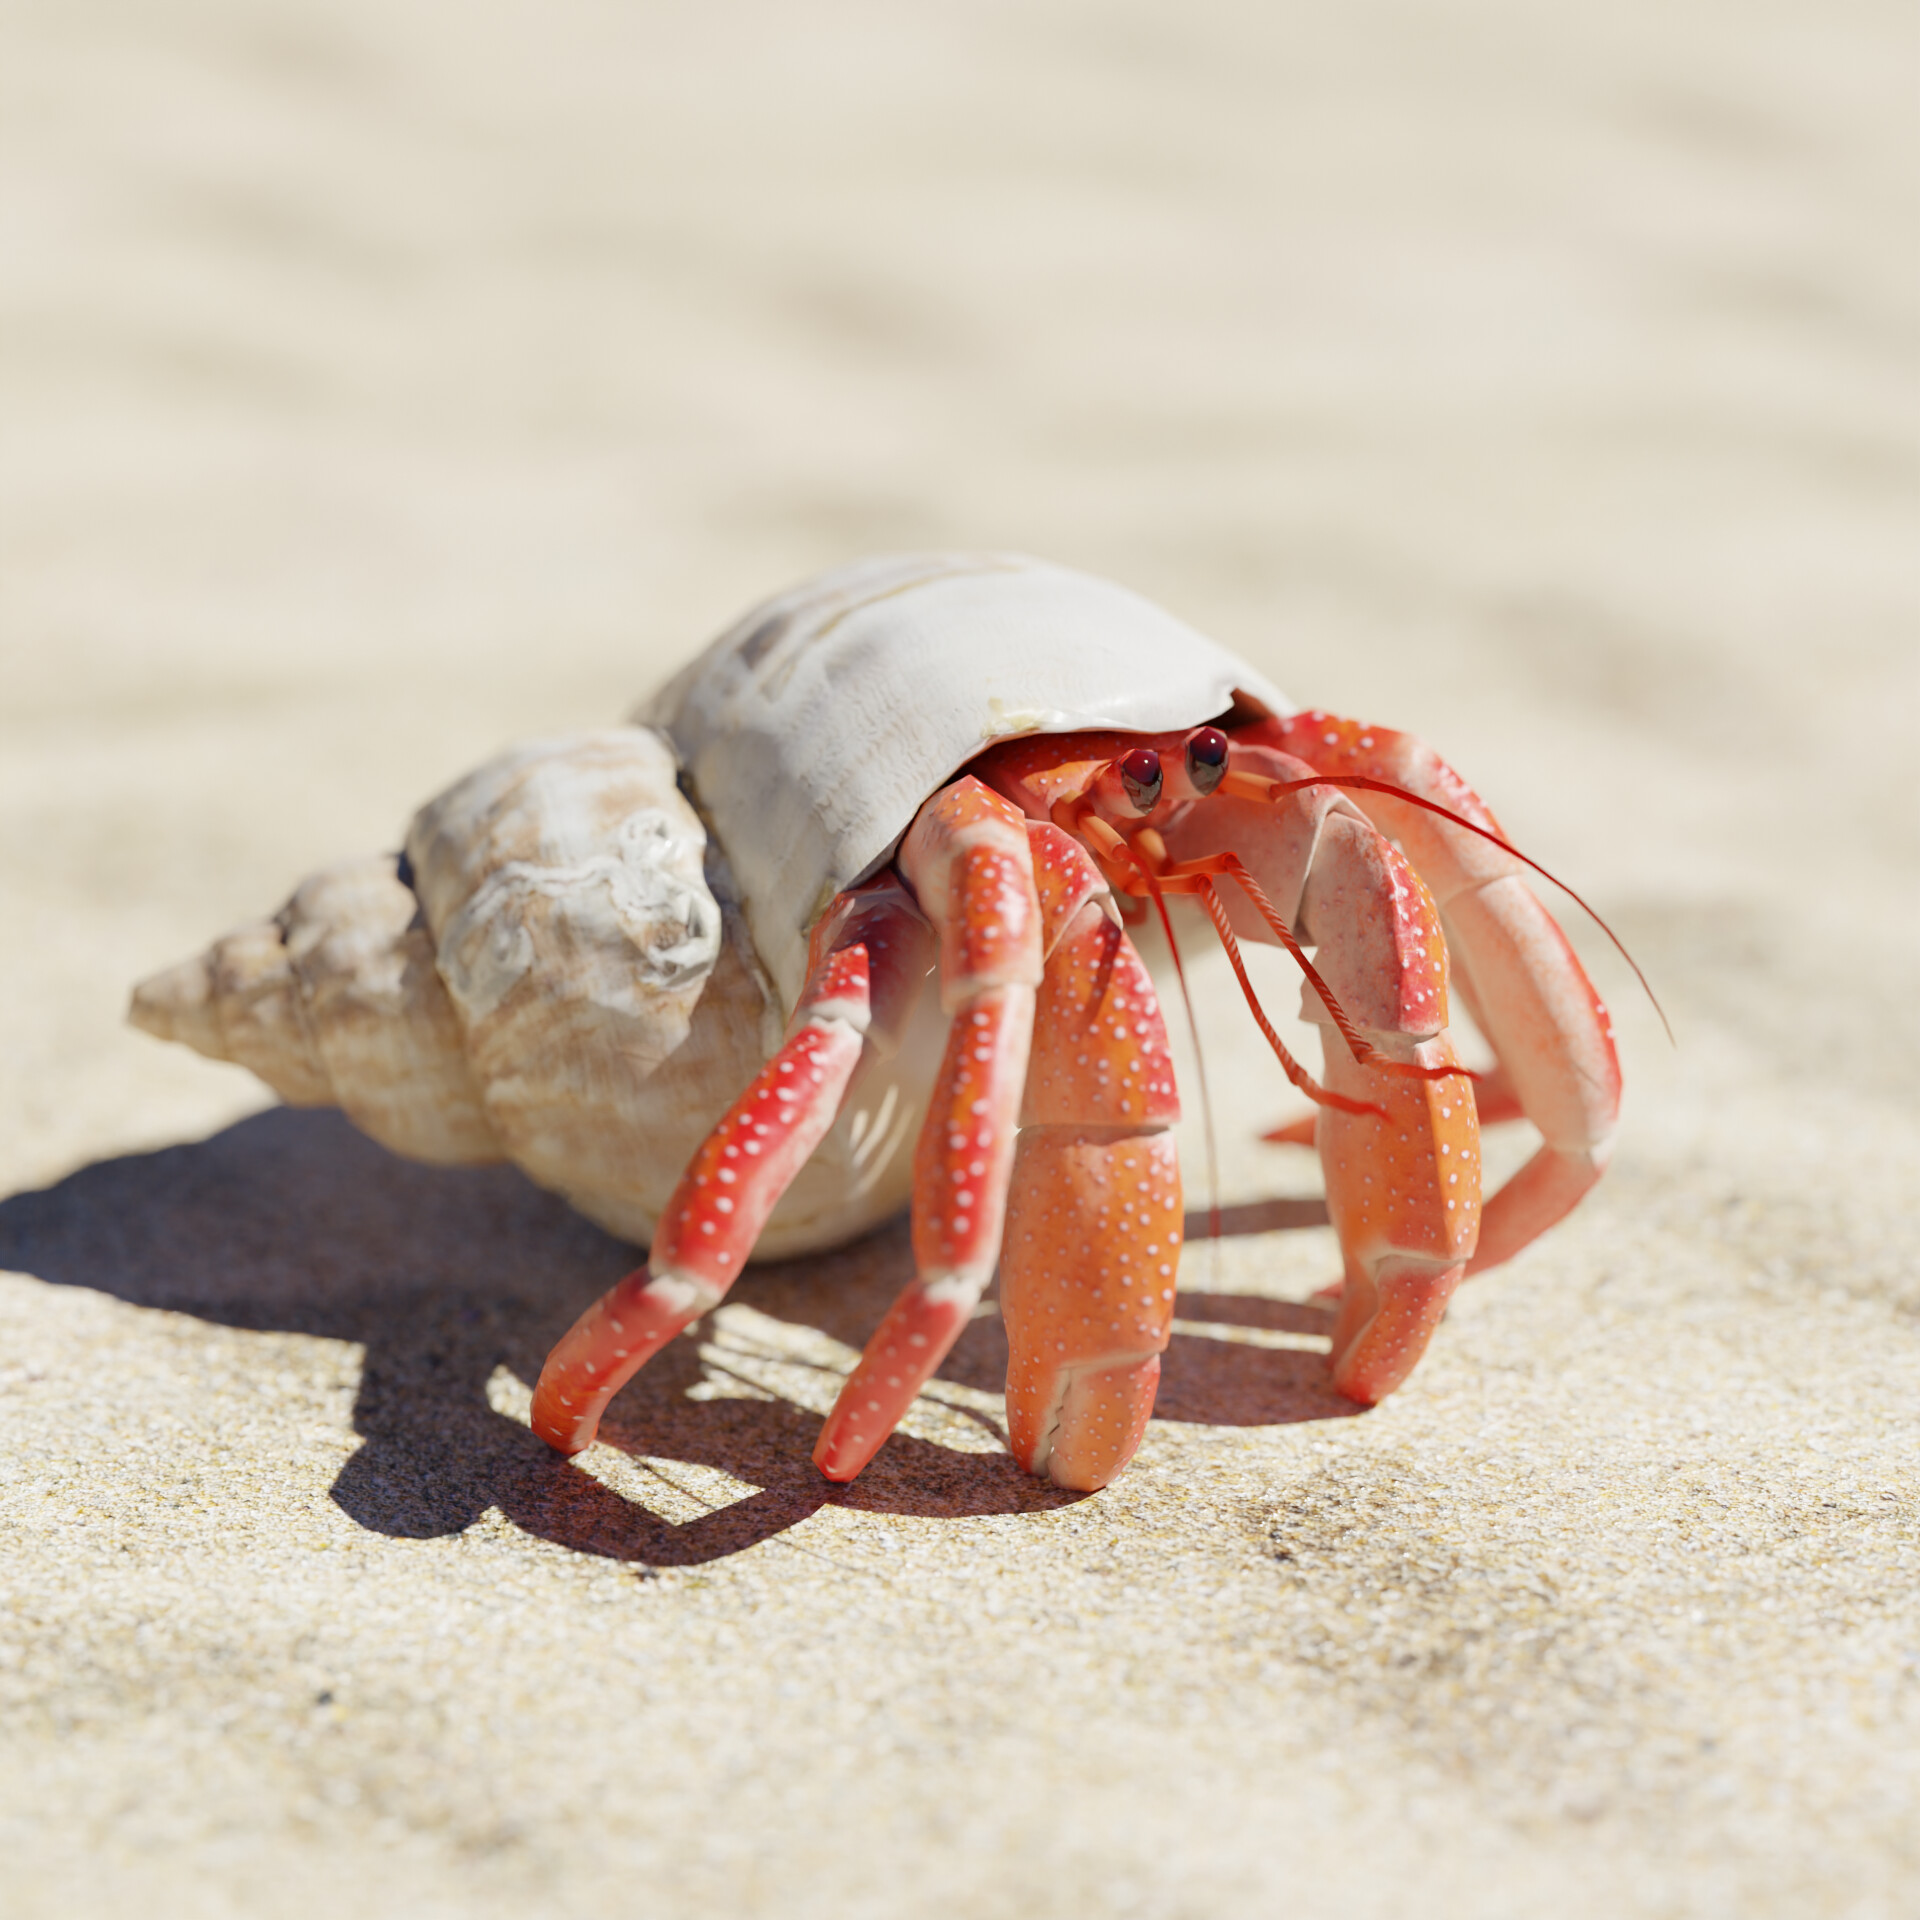 Hermit Crab - Finished Projects - Blender Artists Community